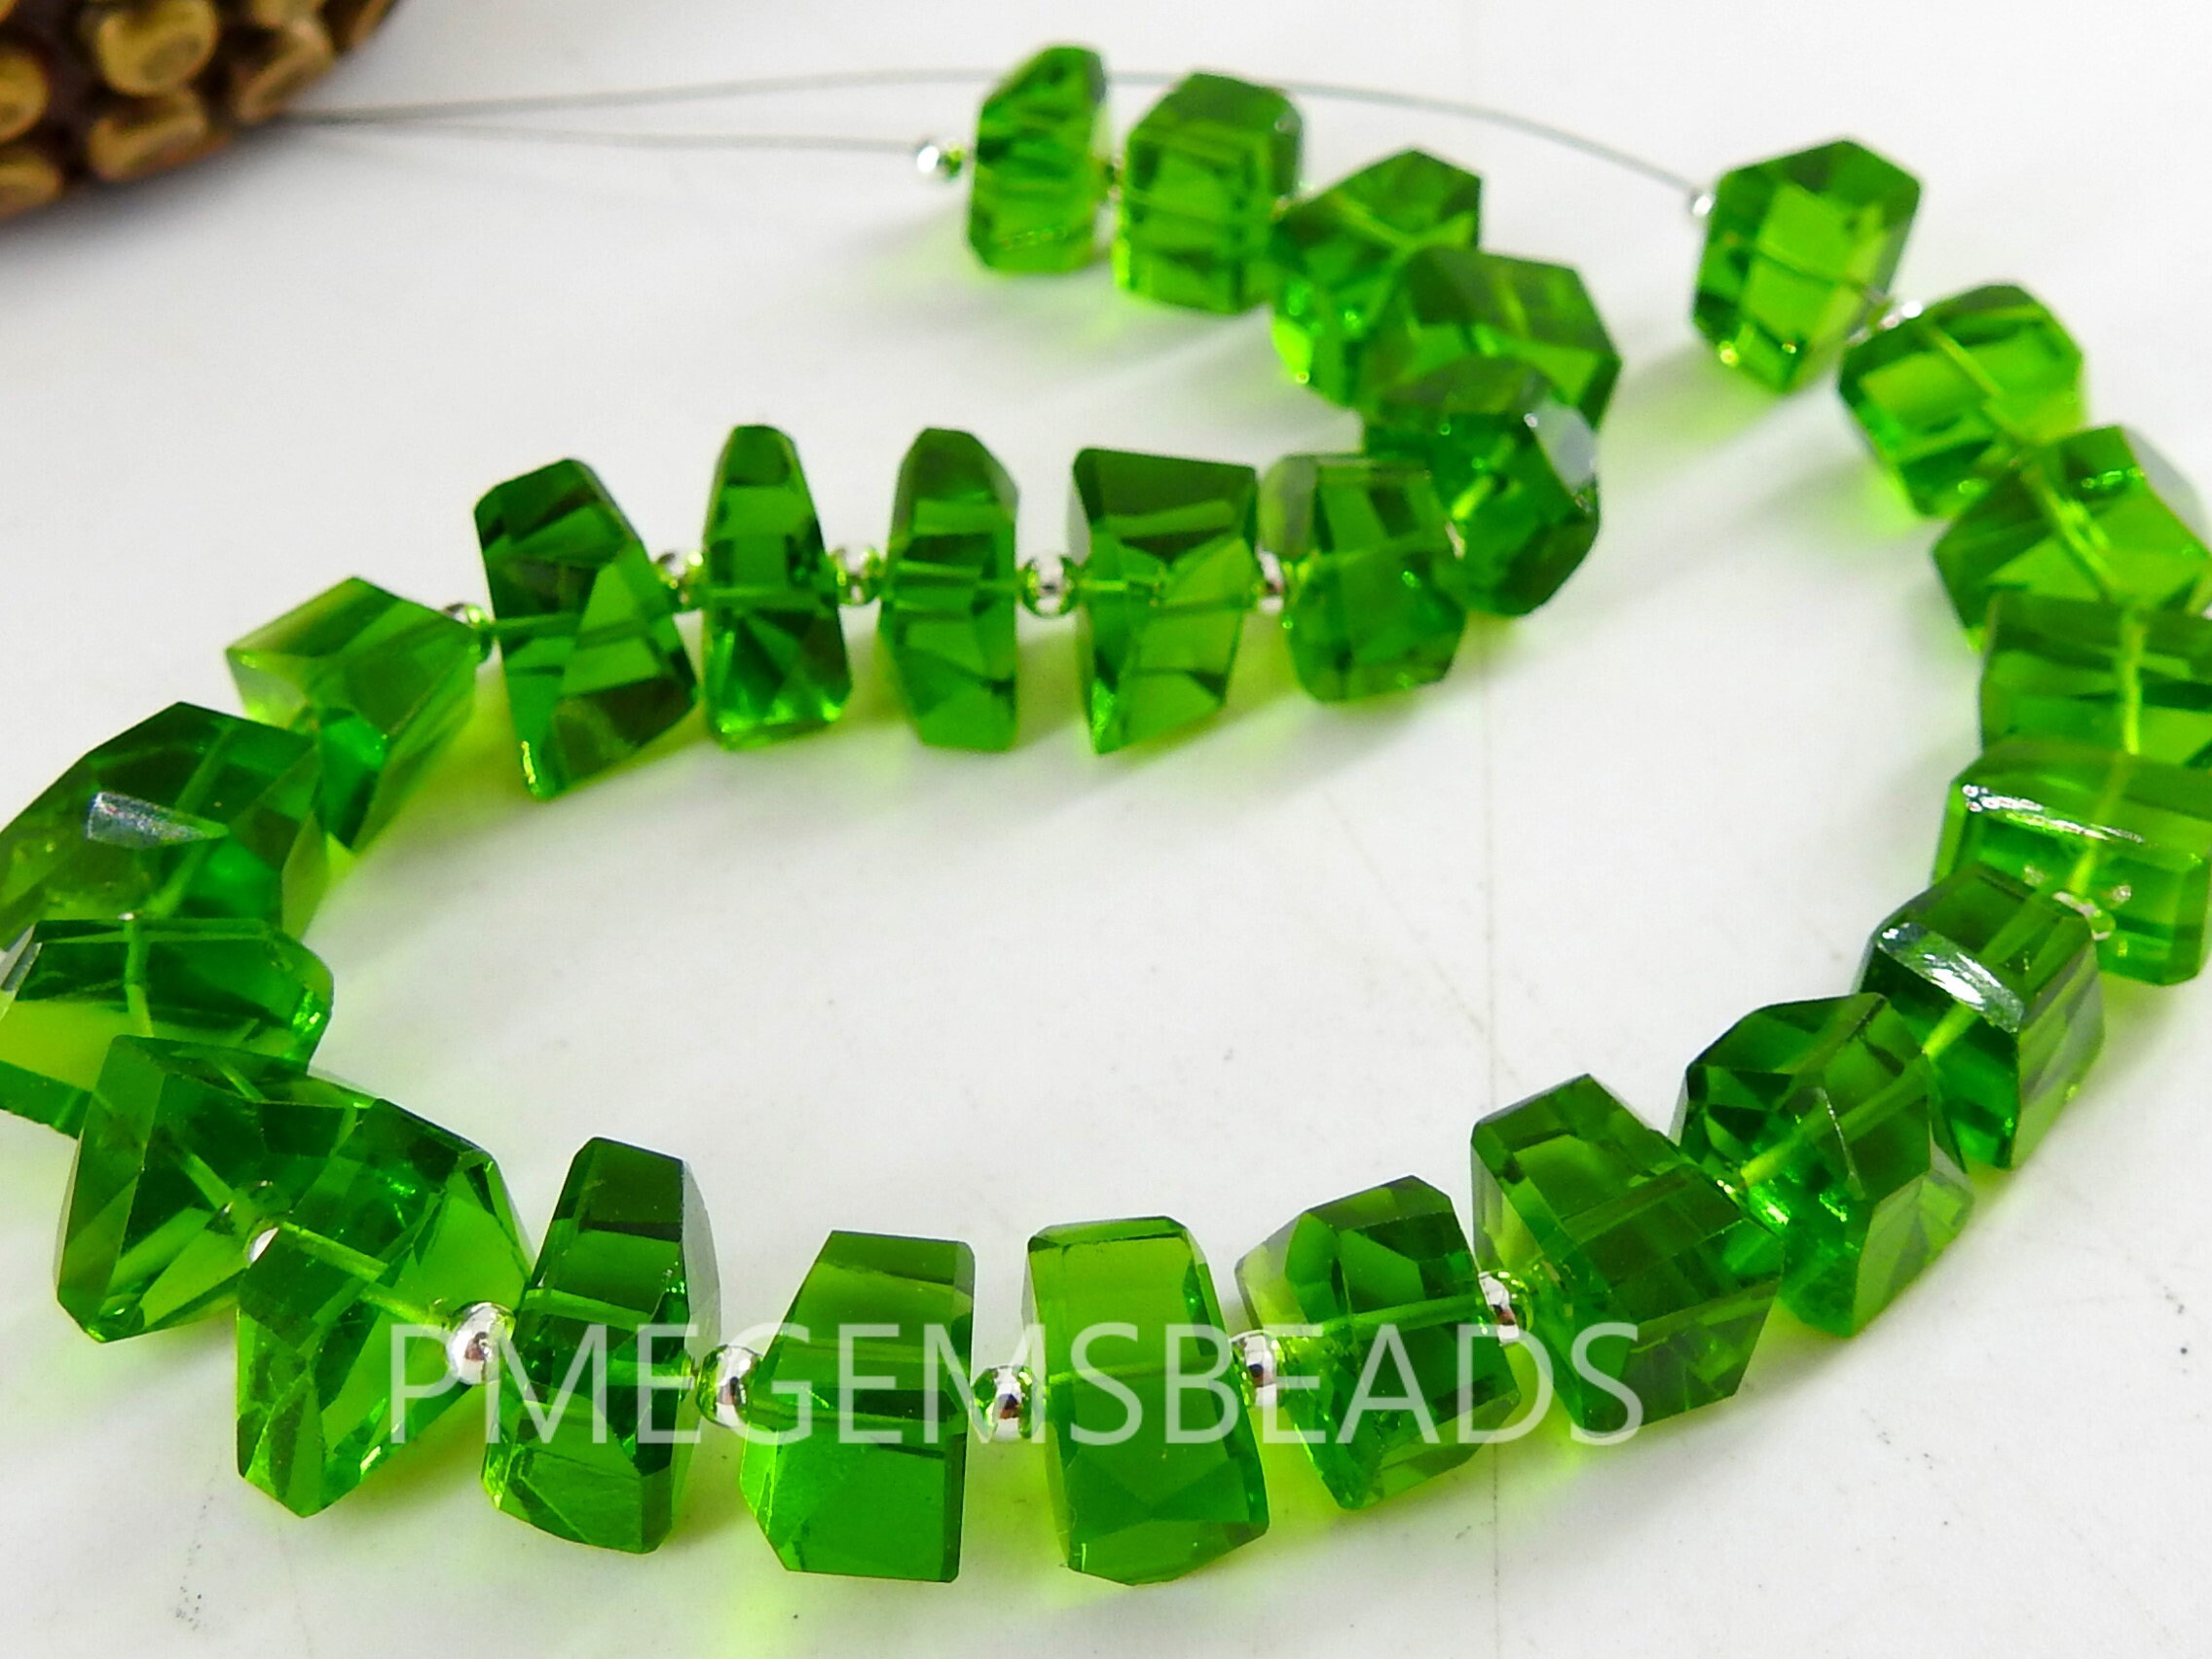 Chrome Green Quartz Faceted Tumble,Nugget,Hydro,Irregular,Loose Stone,For Making Jewelry,Necklace,Bracelet 8Inch 8-10MM Approx (pme) | Save 33% - Rajasthan Living 17